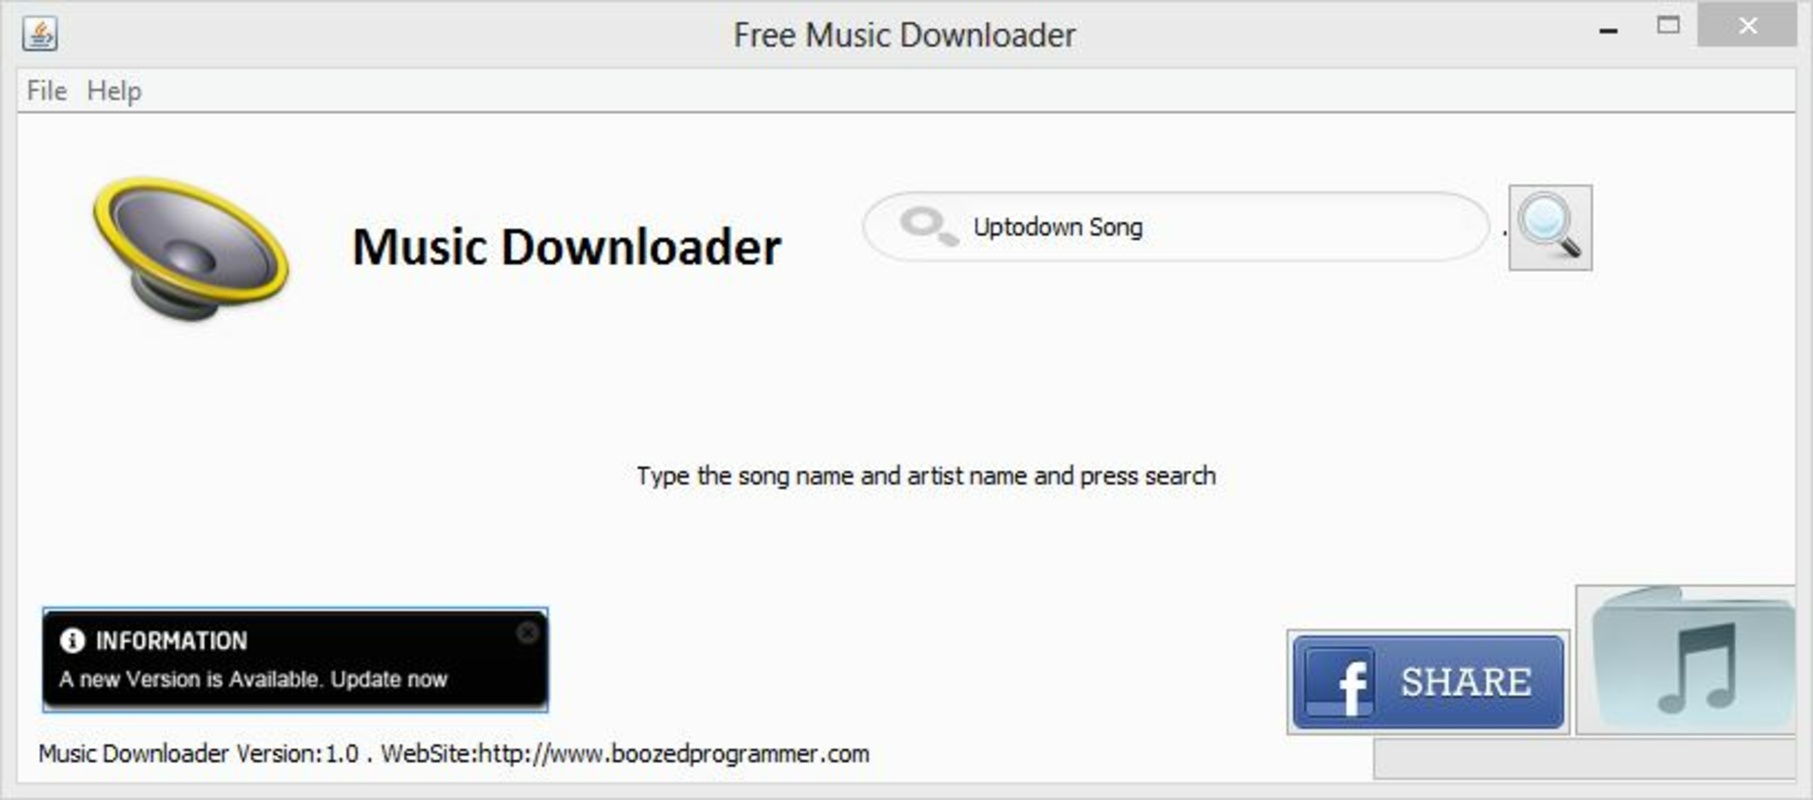 Free Music Downloader 1.0.0.4 feature